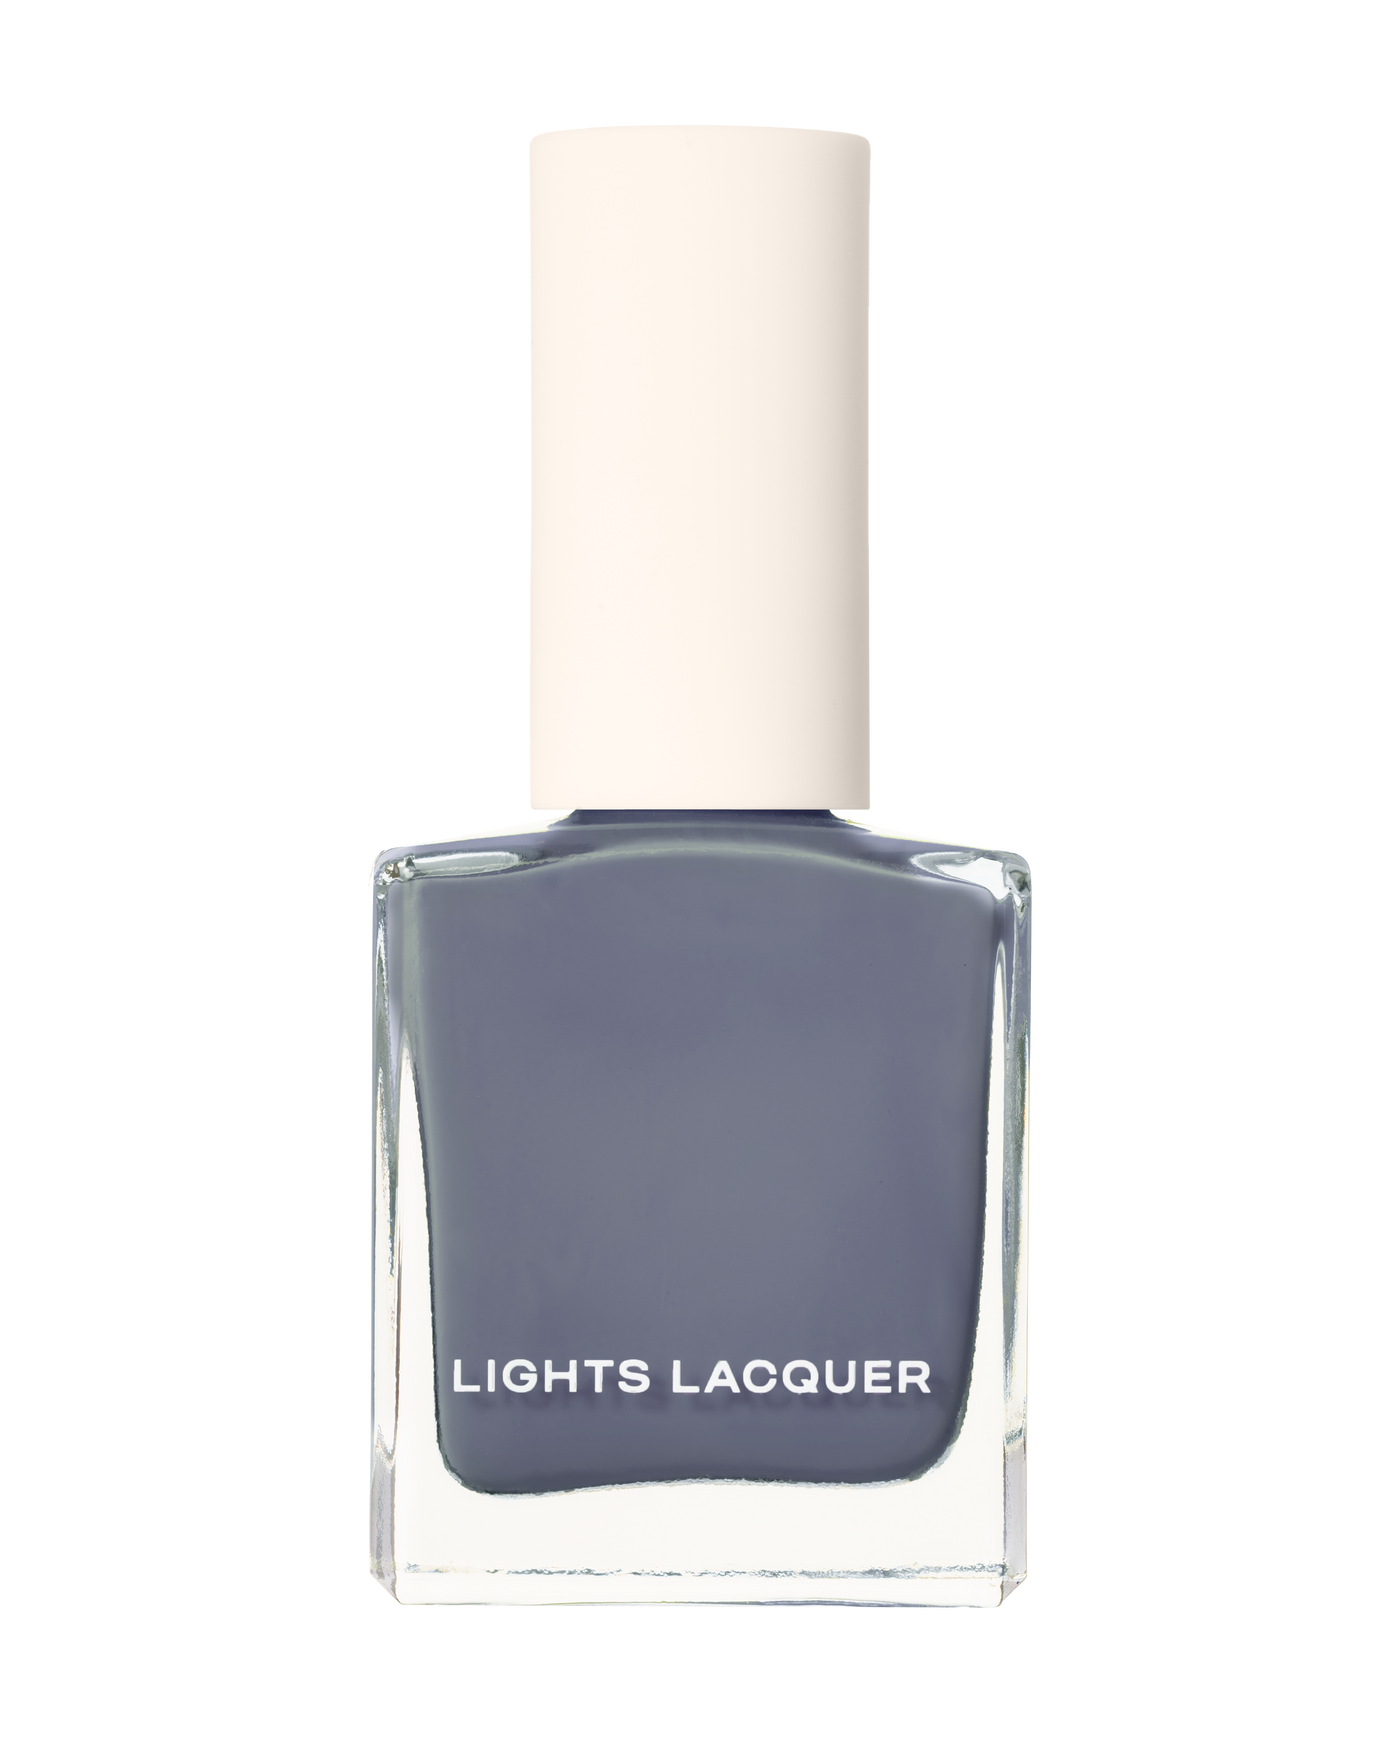 Cold Case Lights Lacquer